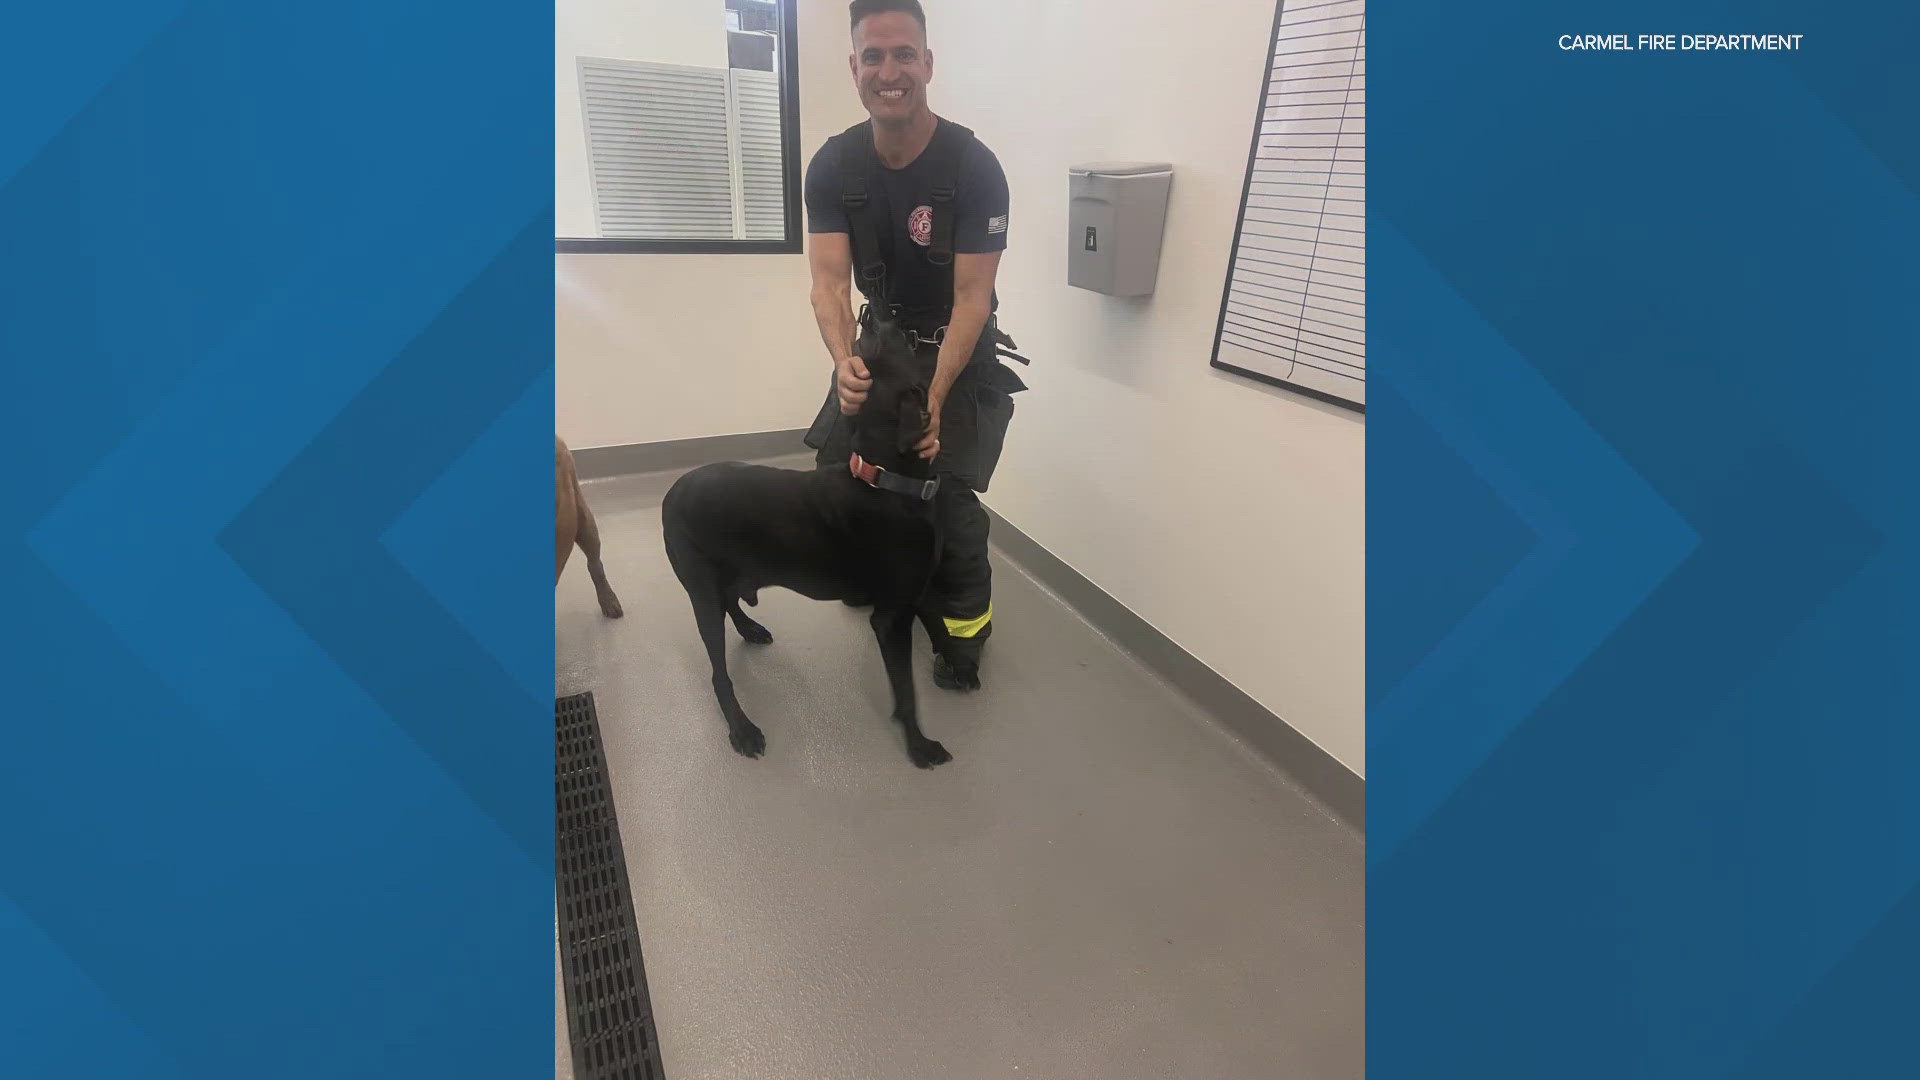 A black lab named Bear pulled the alarm in an attempt to signal to his owner that he was ready to leave the groomers.